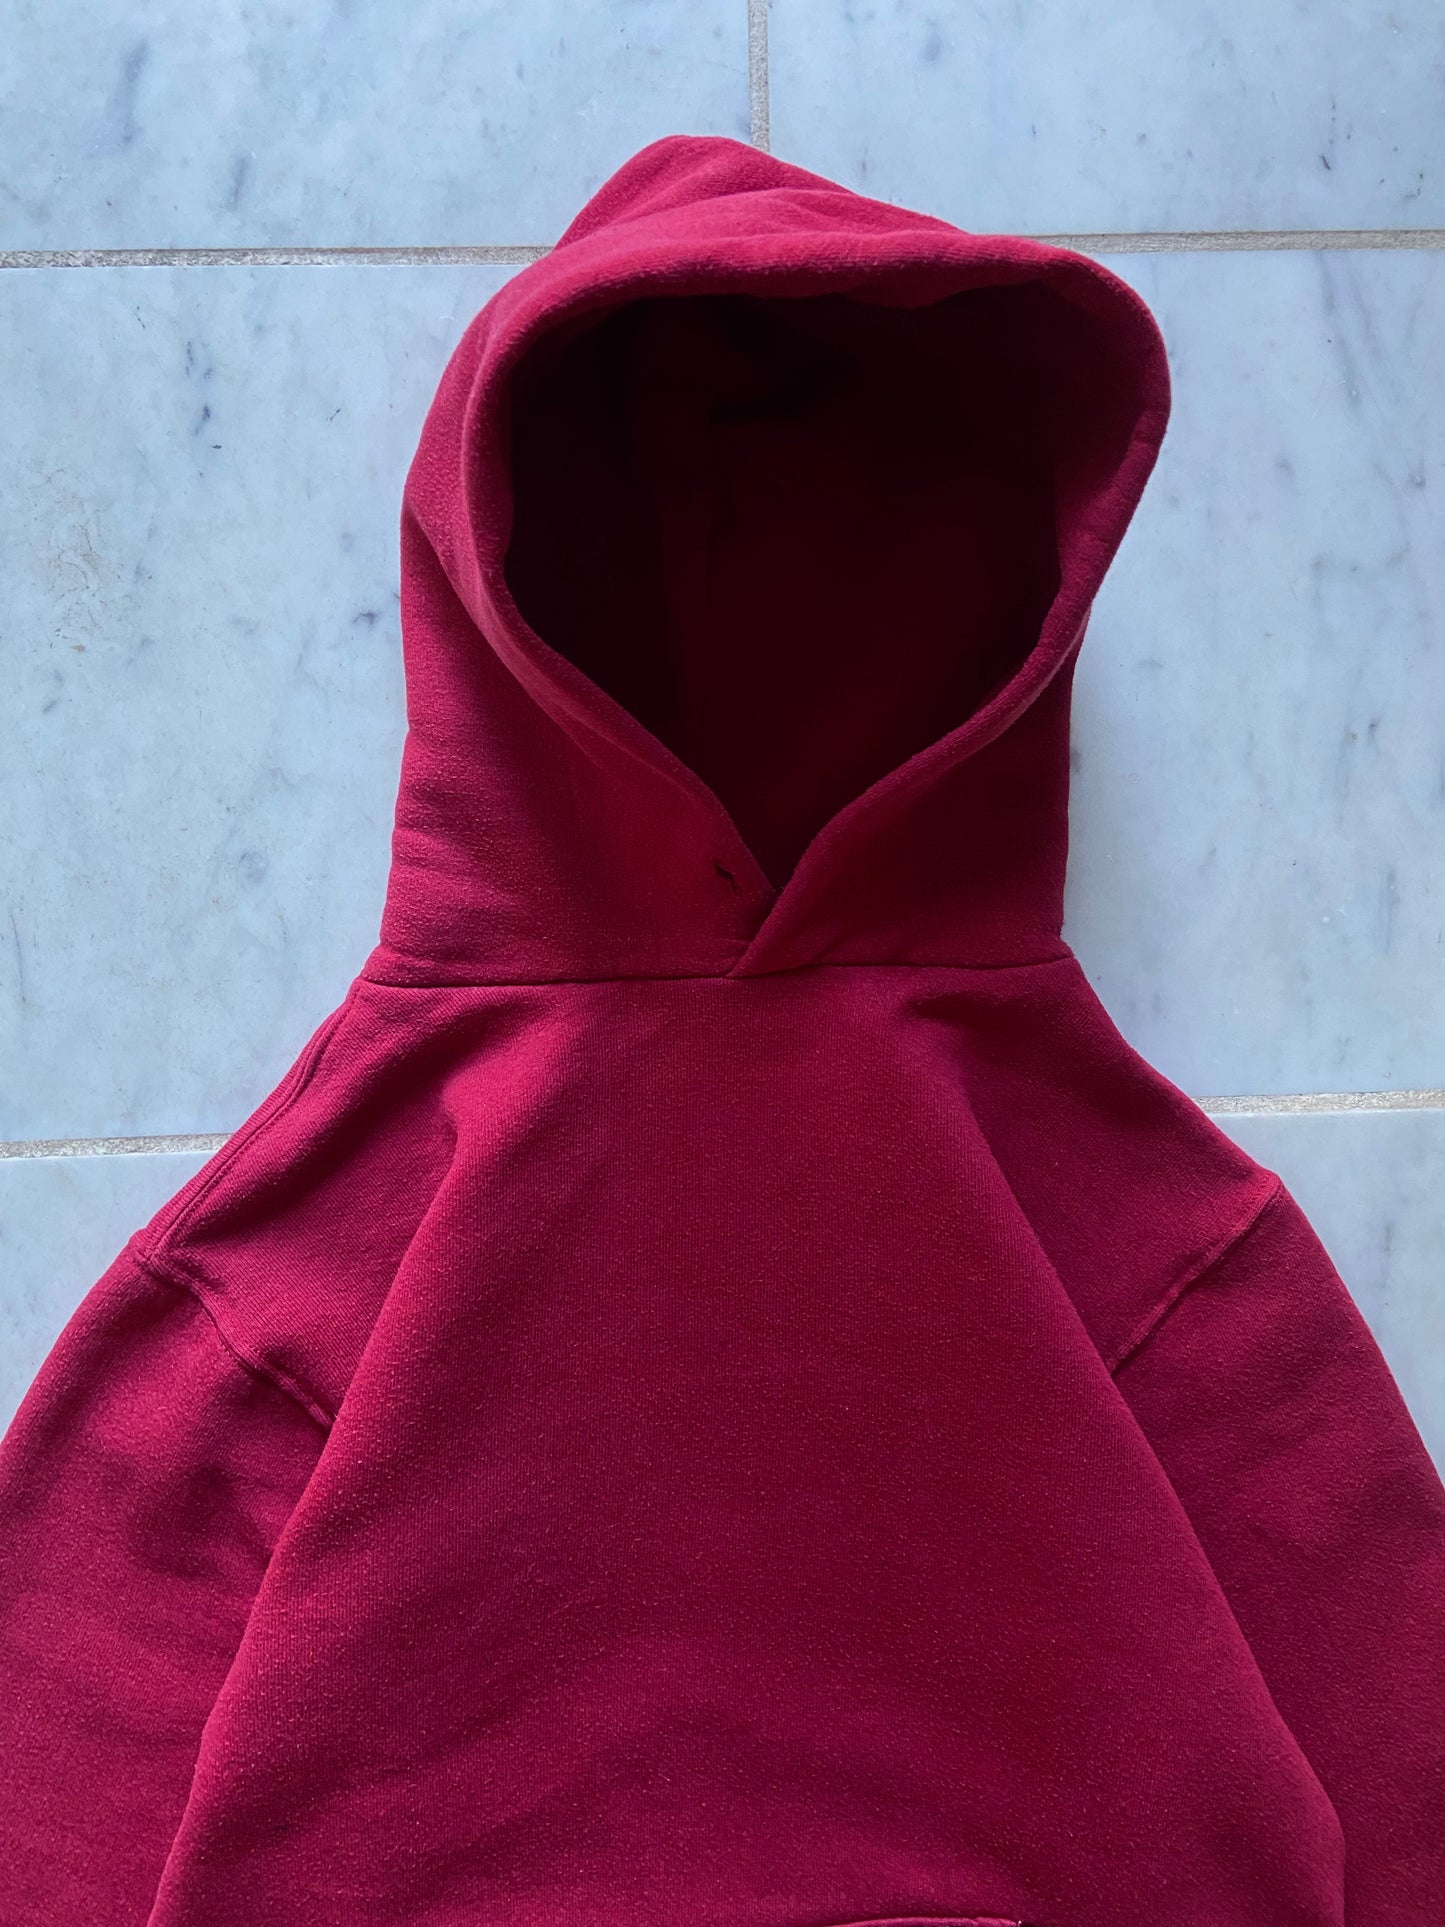 RUSSELL MAROON HOODIE - XSMALL/SMALL